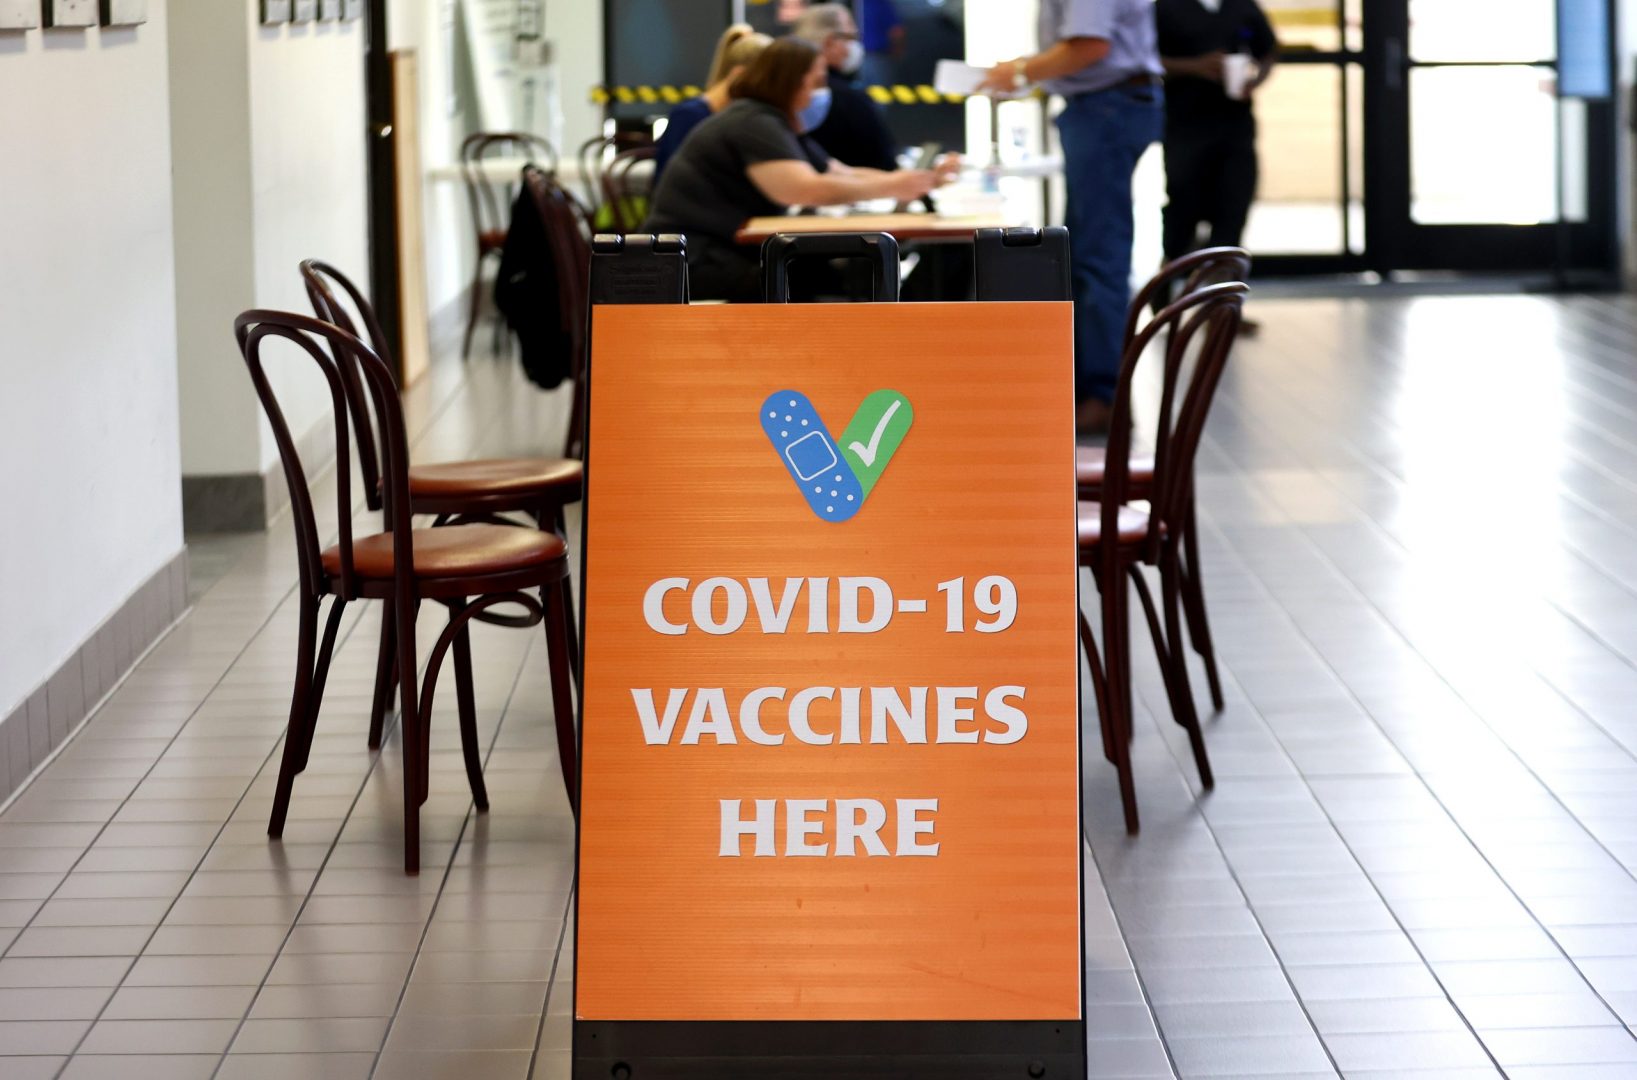 LAKE CHARLES, LOUISIANA - AUGUST 10: (EDITORIAL USE ONLY) A sign promotes COVID-19 vaccines at Lake Charles Memorial Hospital on August 10, 2021 in Lake Charles, Louisiana. Hospitalizations for COVID-19 surpassed another record in the state yesterday to 2,720 with Louisiana as one of the nation's epicenters while the spread of the Delta variant continues. More than ninety percent of Louisiana's hospitalized COVID-19 patients are unvaccinated. Lake Charles Memorial currently holds 52 COVID-19 patients, 25 of whom are in the ICU. (Photo by Mario Tama/Getty Images)